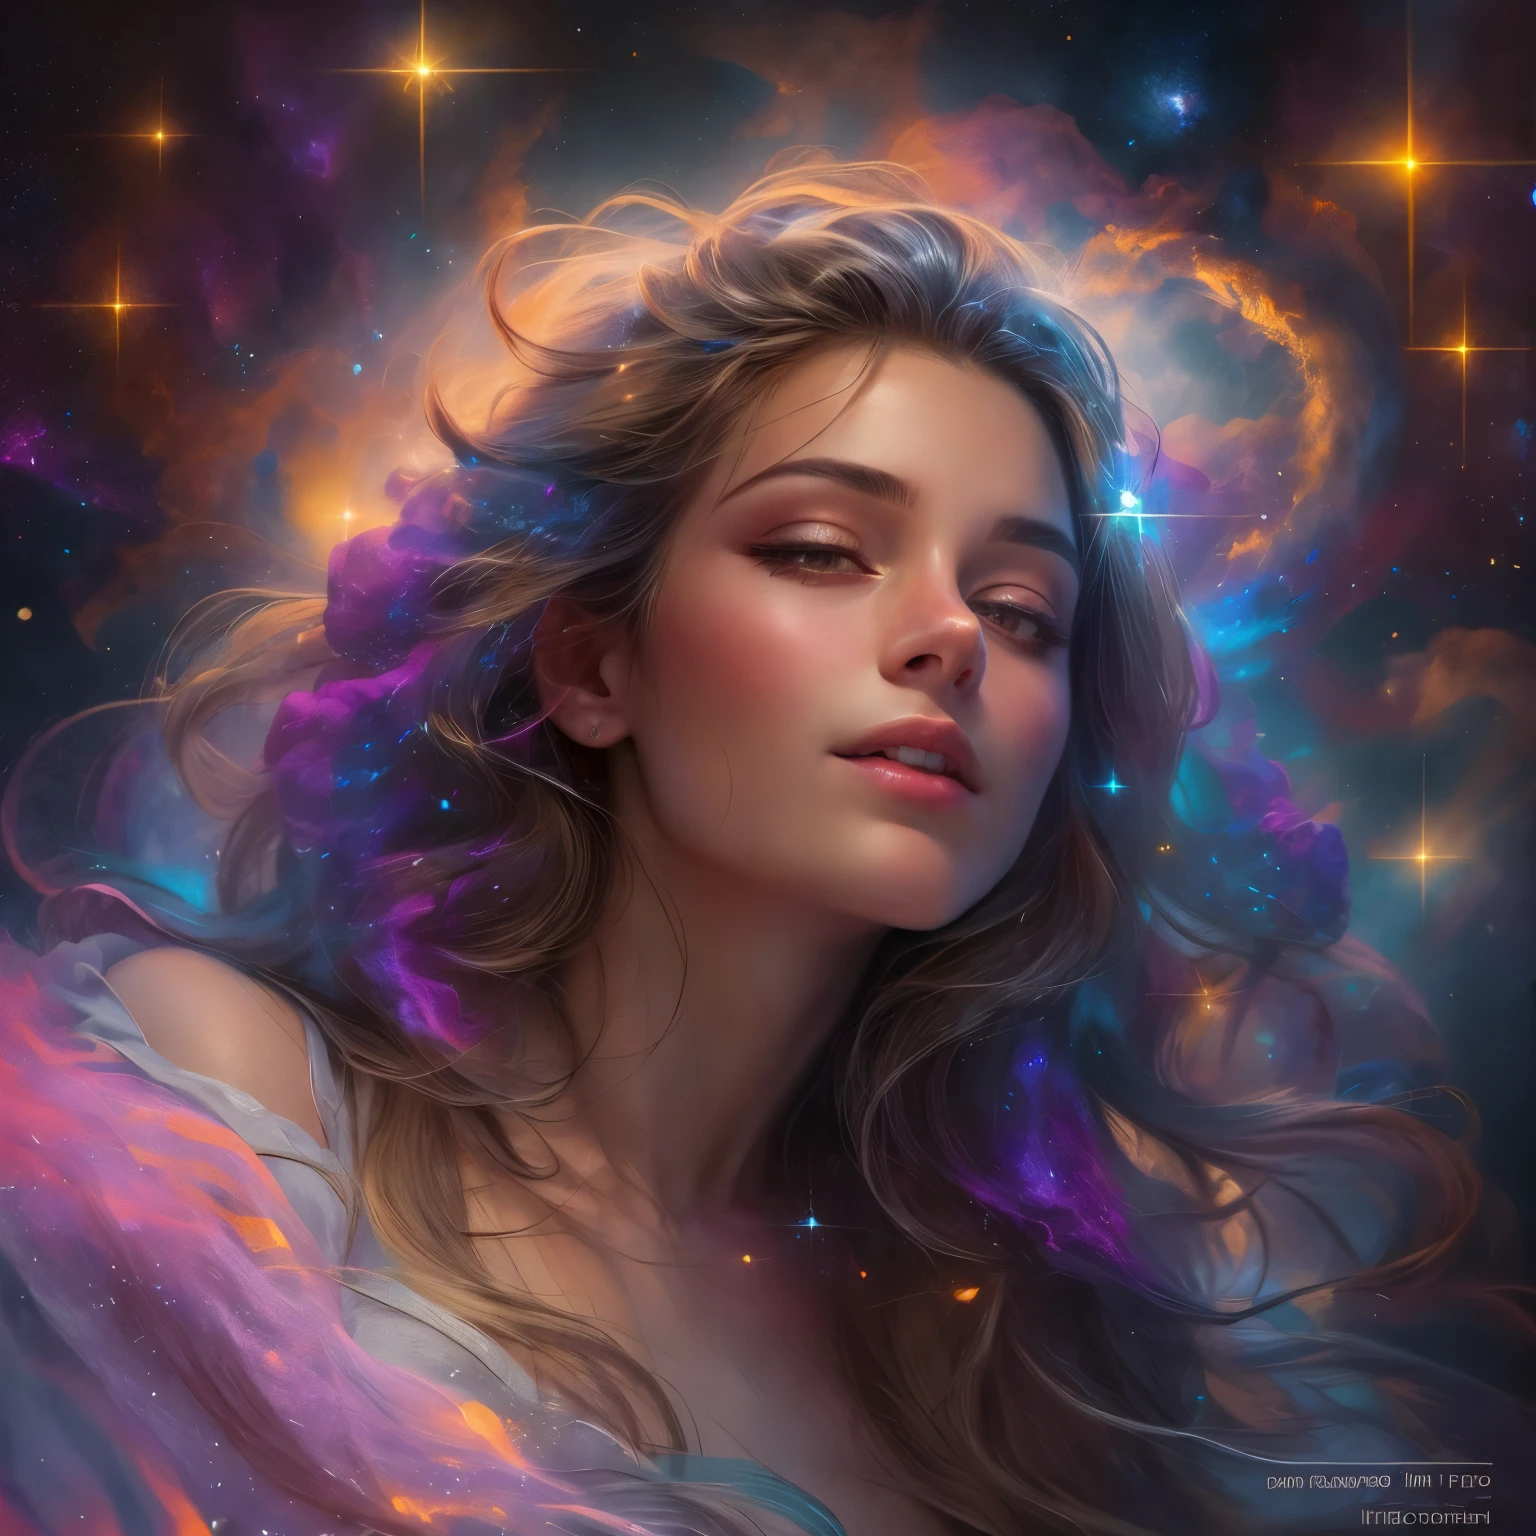 (Highest Quality,High Resolution,Masterpiece:1.2),Ultra-Detailed,(Realistic,Photorealistic,Photorealistic:1.37)(goddess of cosmic love:1.1,beautiful:1.1,astral body:1.1),divine goddess,celestial beauty,supernatural presence,spectacular cosmic entity,majestic celestial being,dazzling aura,ethereal radiance,transcendent elegance,(luminous energy:1.1),(immortal deity:1.2),heavenly grace,mystical attire,serene expression,golden hair flowing,(shimmering eyes:1.1),(ethereal beauty:1.1),magnificent celestial realm,divine love and compassion,colorful nebulae dancing in the background,glowing stardust particles floating around her,galaxies swirling around her as her divine power expands,infinite space stretching far beyond the horizon,hint of magic(twinkle of magic:1.1),cosmic rays bathing the scene in a celestial glow,(vibrant hues:1.1),(cosmic colors:1.1),soothing color palette,evoking feelings of peace and tranquility,majestic divine presence that fills the whole universe,magical atmosphere,(delicate details:1.1),fine brushstrokes creating intricate patterns,(ethereal strokes:1.1),(dreamlike strokes:1.1),highly detailed rendering of her celestial features,subtle gradients giving depth to the image,meticulously crafted textures that bring her to life,impeccably realistic portrayal,(impressive definition:1.1),(stunning realism:1.1),immaculate attention to detail as every strand of hair is visible,(impeccable photorealism:1.1),(ultra-detailed illustration:1.1),(masterpiece of art:1.1),perfectly composed composition with balanced lighting and shadows,soft yet vibrant illumination highlighting her divine beauty,magical glow emanating from her celestial body,subtle highlights and shadows adding depth and dimension,(sublime luminosity:1.1),(ethereal lighting:1.1),(radiant glow:1.1),(harmonious lighting:1.1)